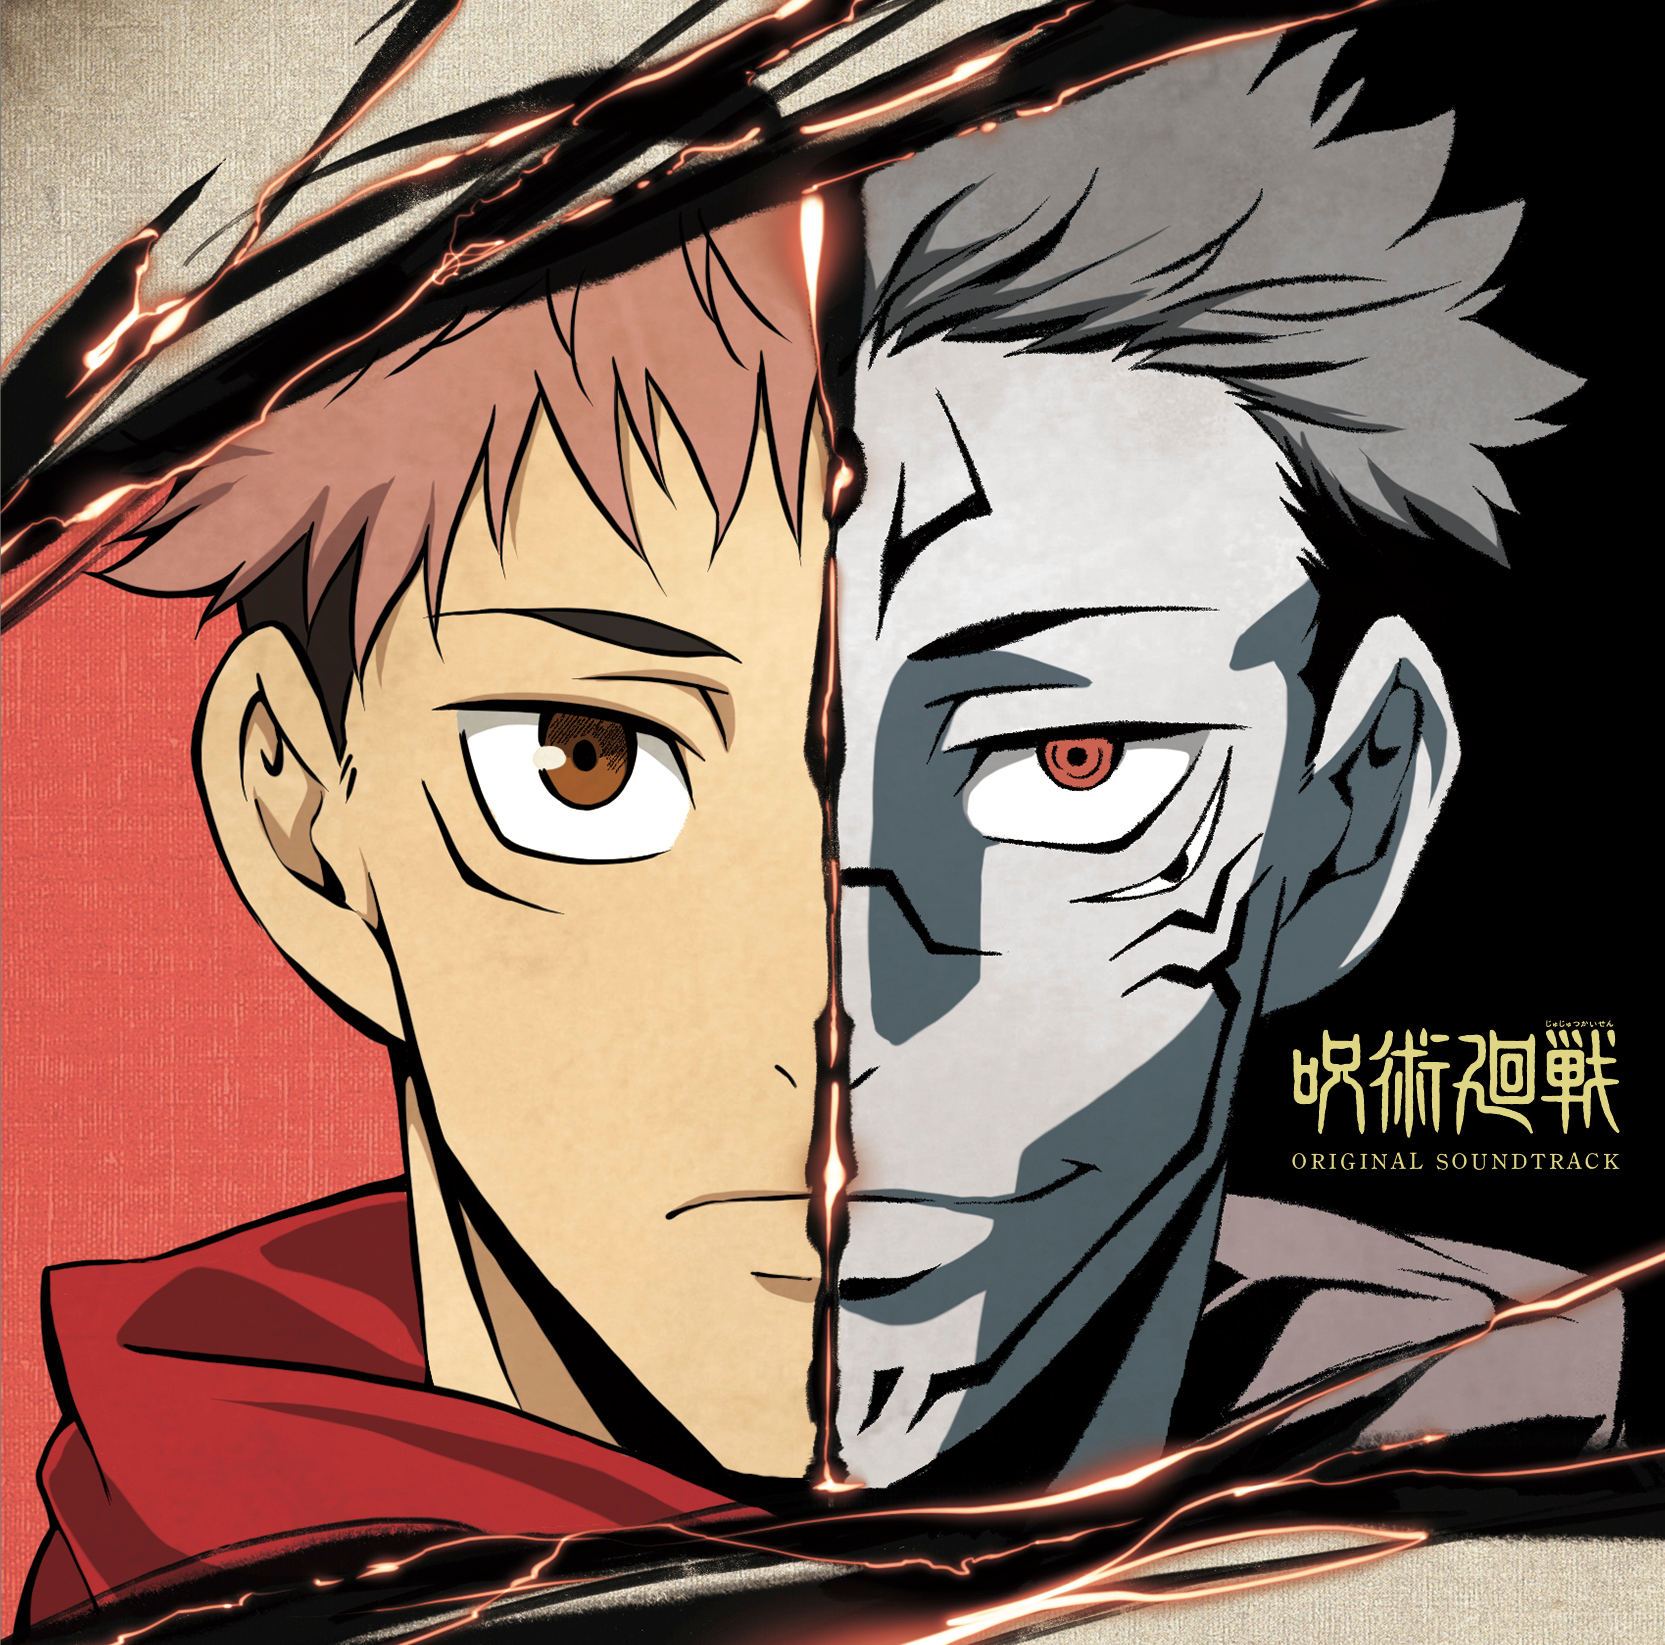 Jujutsu Kaisen Season 2' Special Cover Illustrations for the OP&ED Song :  r/anime